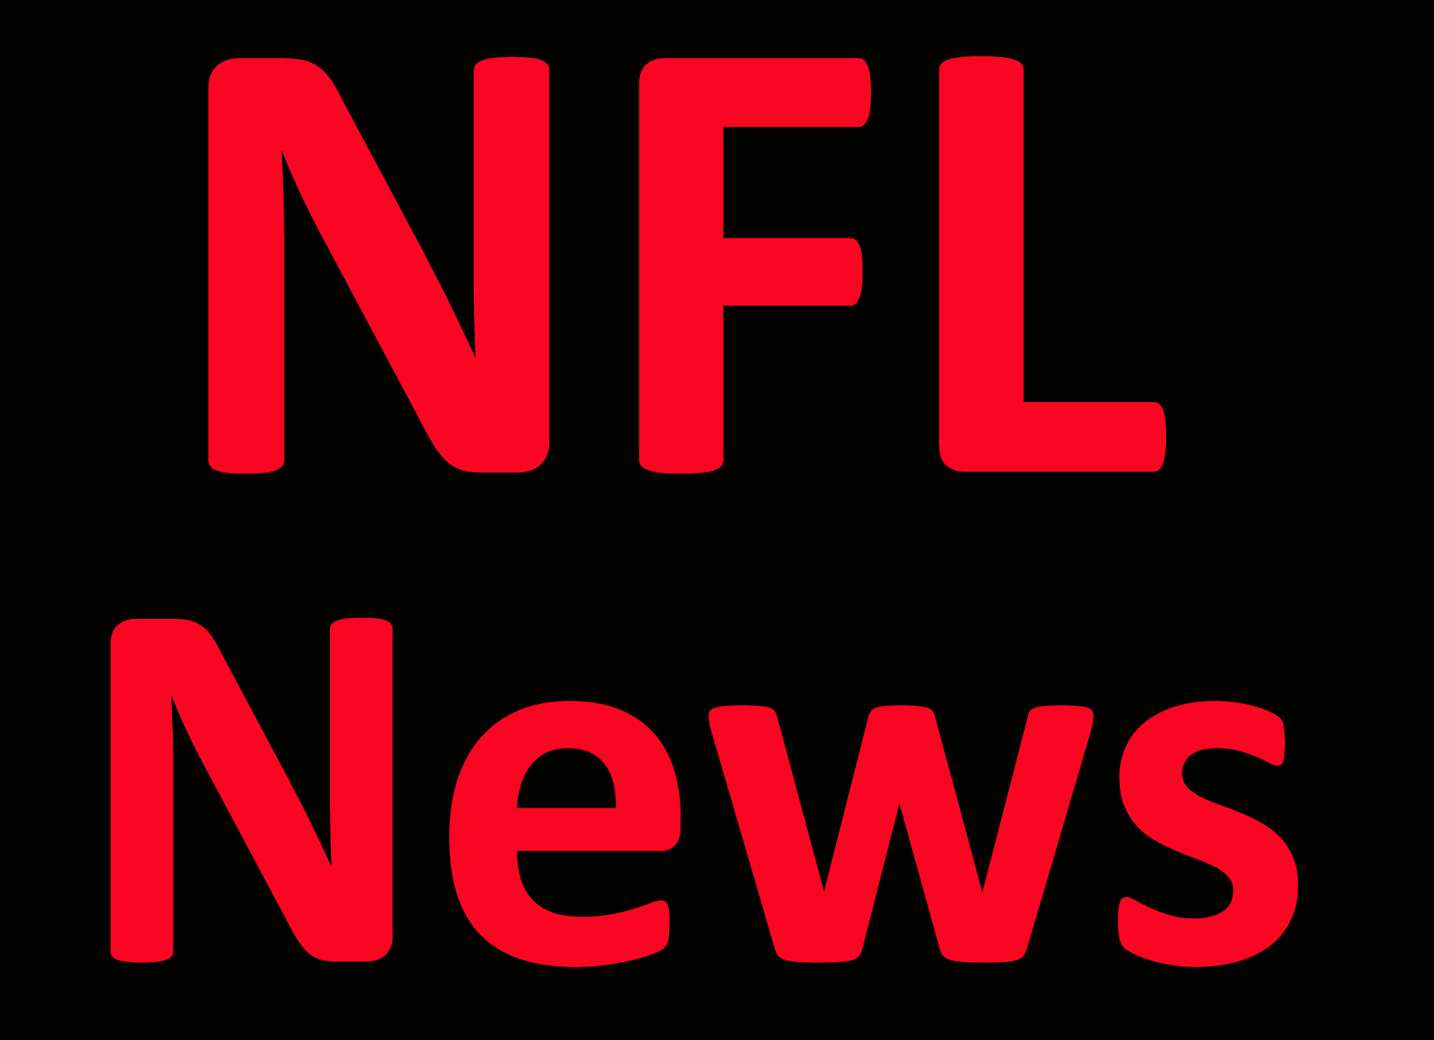 NFL News: Offseason wins, concerns and draft predictions for the Bengals, Browns, Ravens and Steelers Per Report